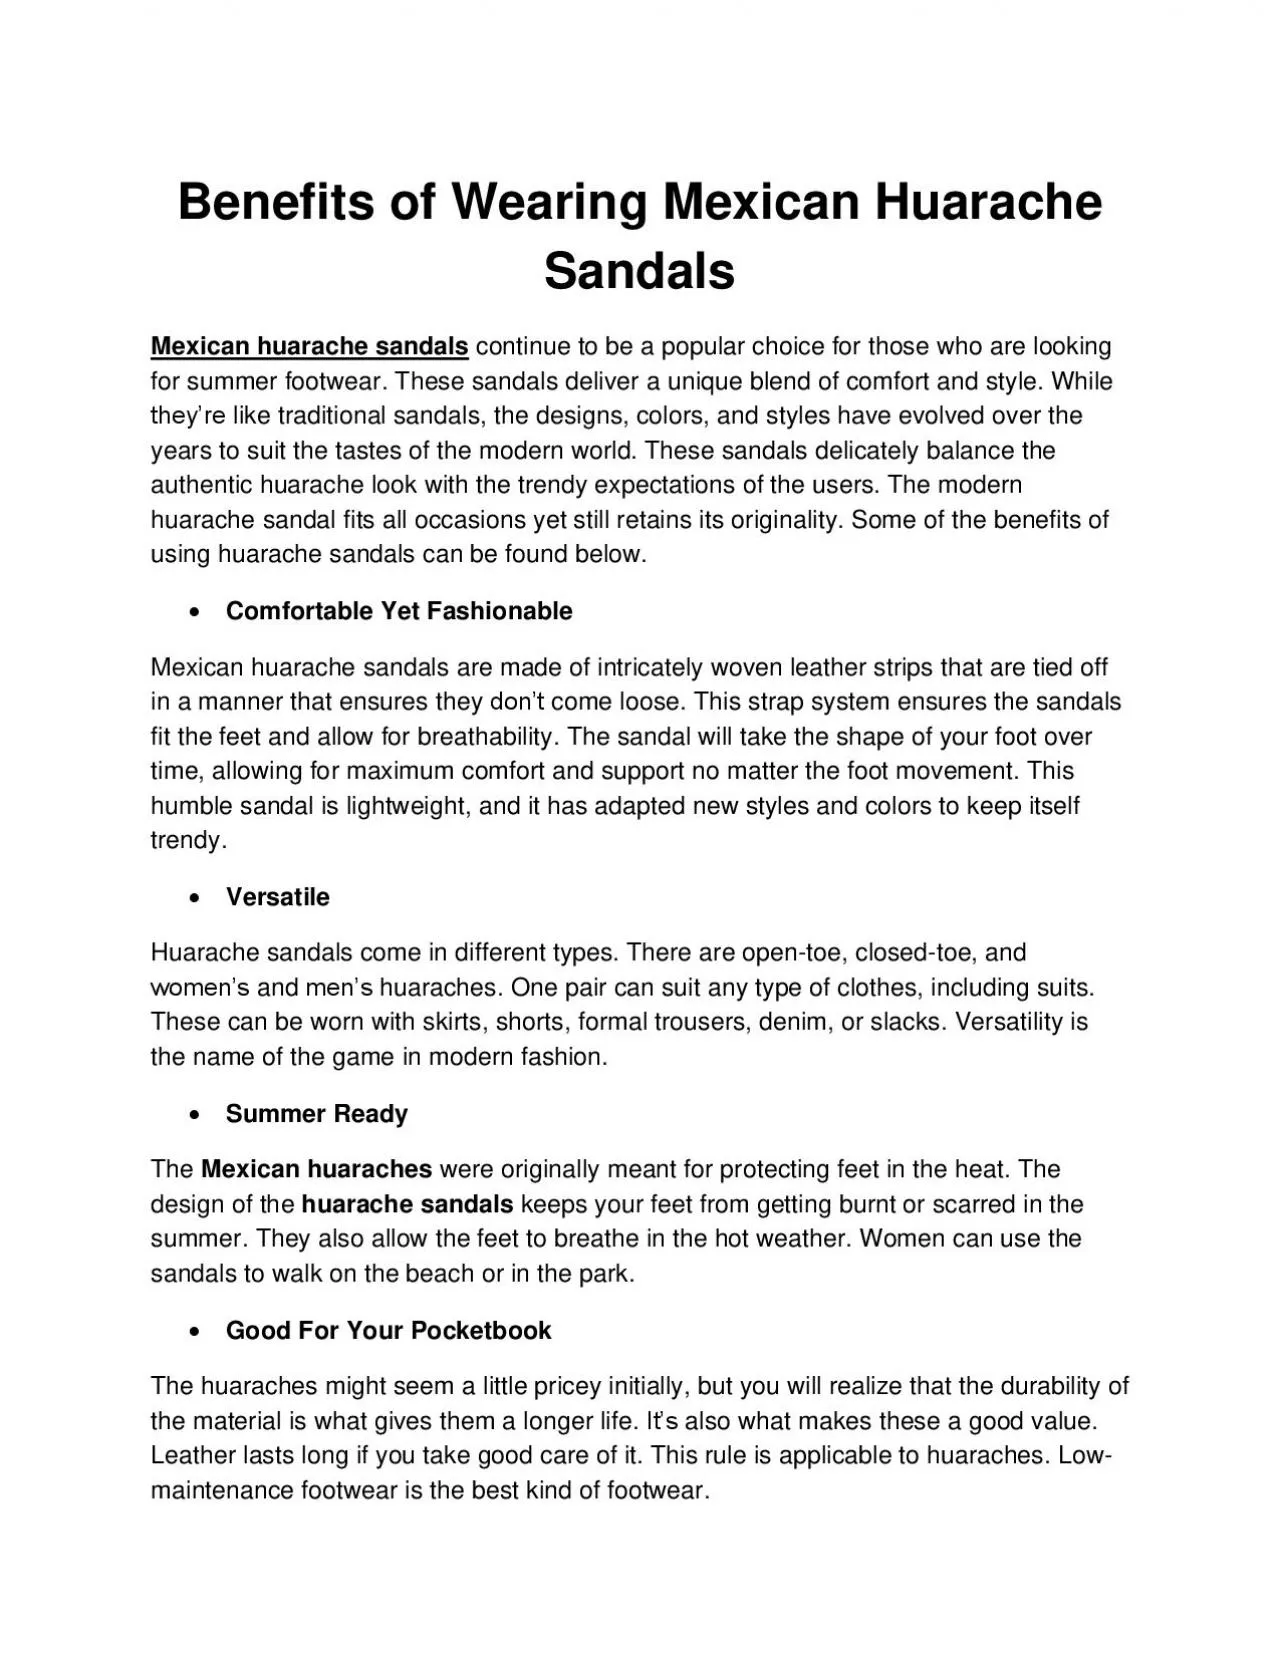 Benefits of Wearing Mexican Huarache Sandals